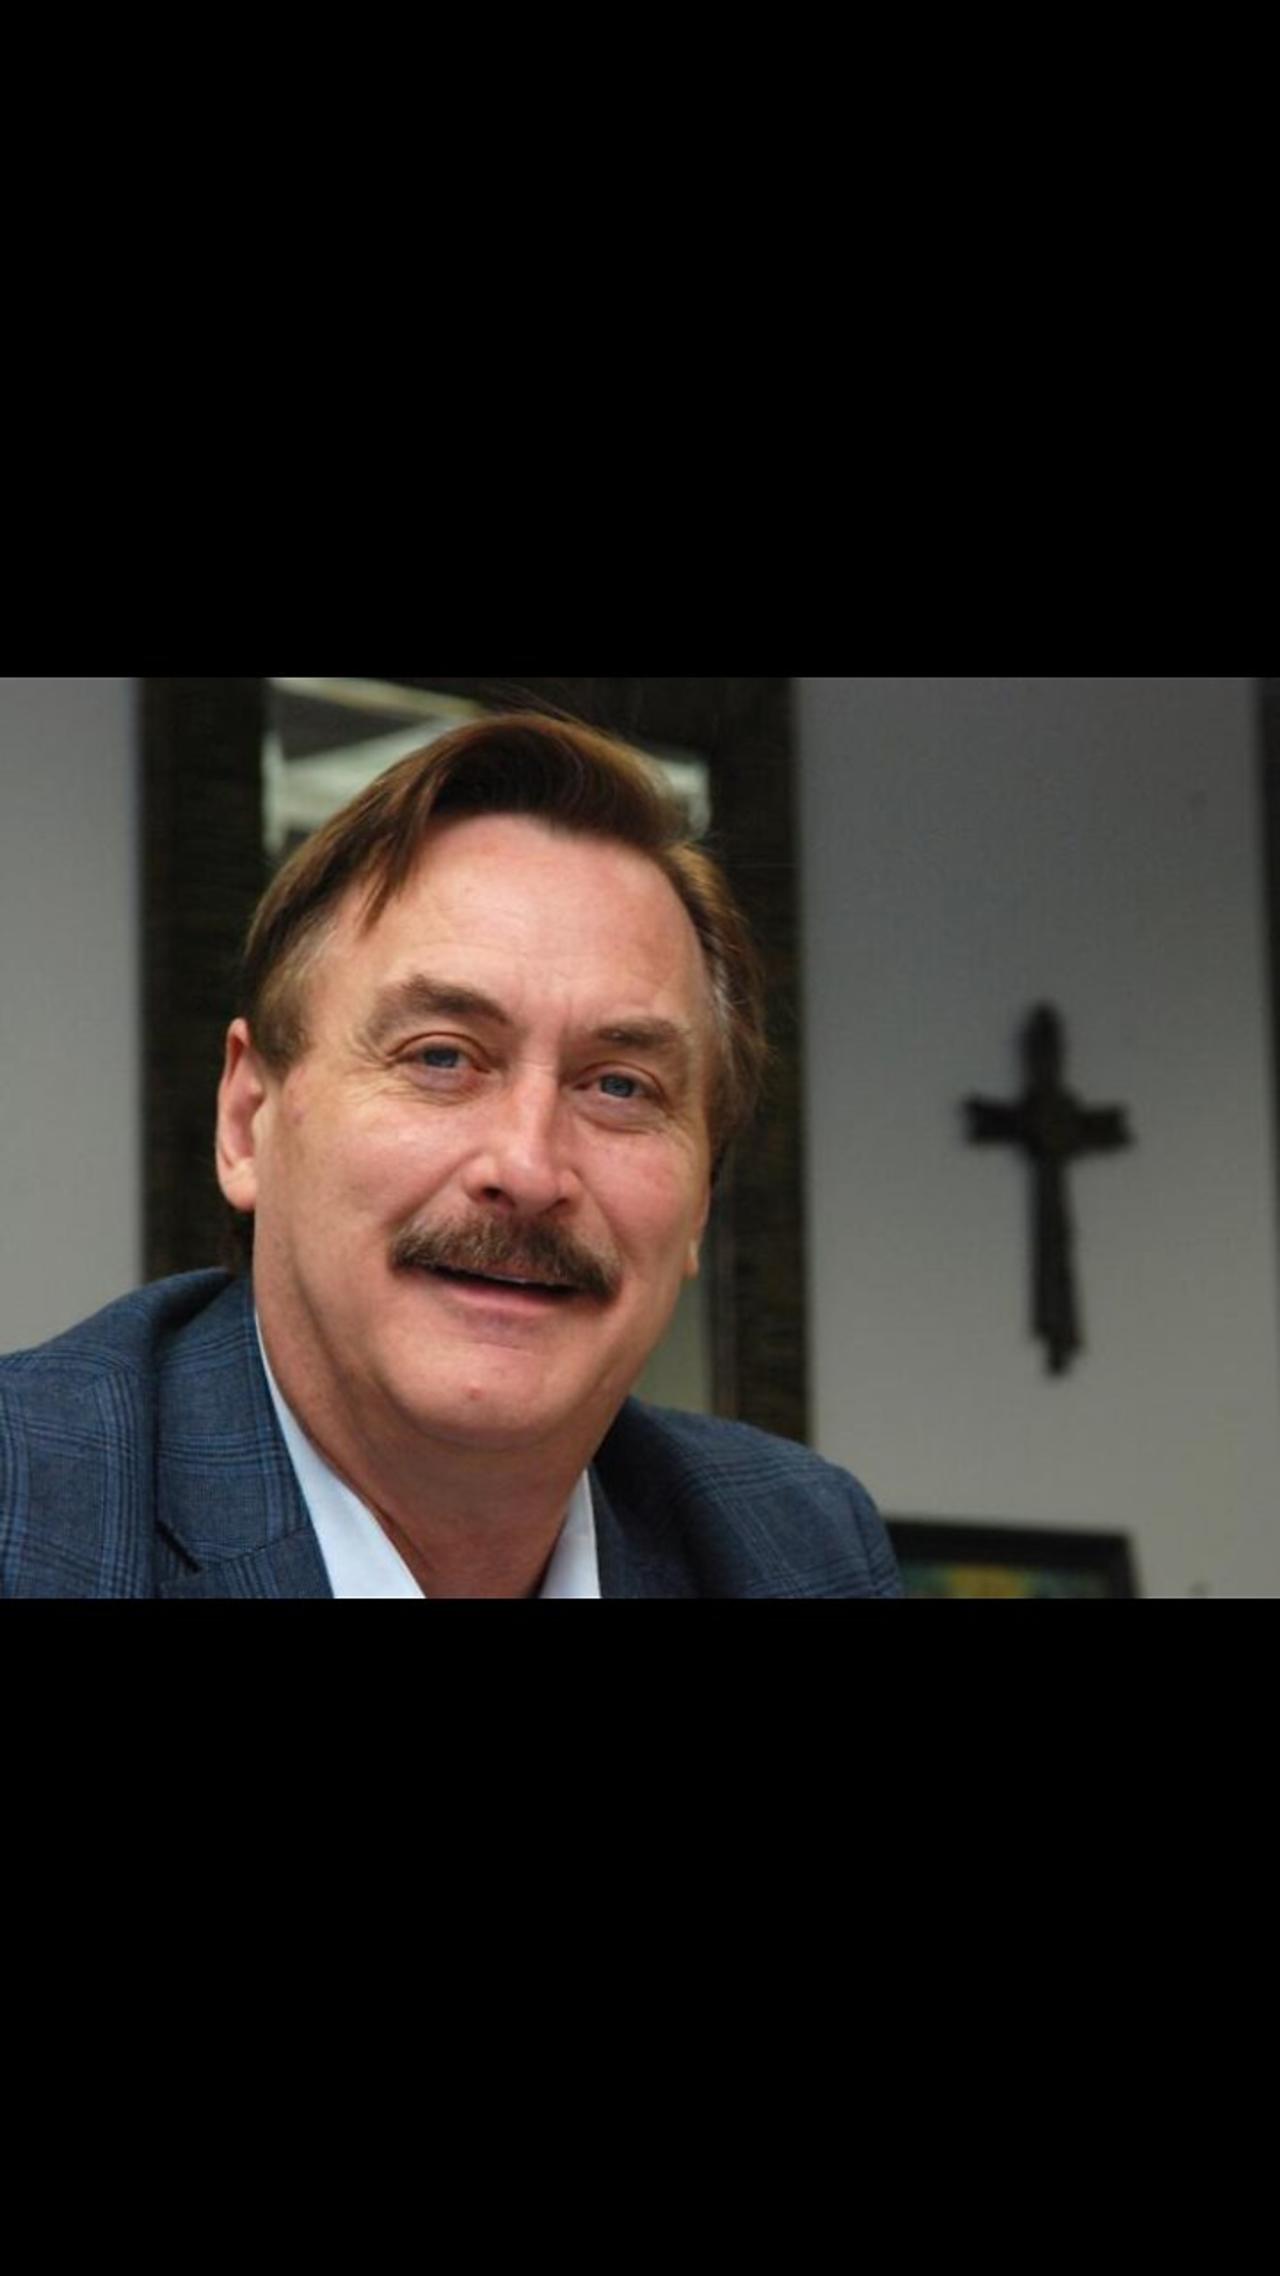 Exclusive: Mike Lindell in his own words what happened with the FBI